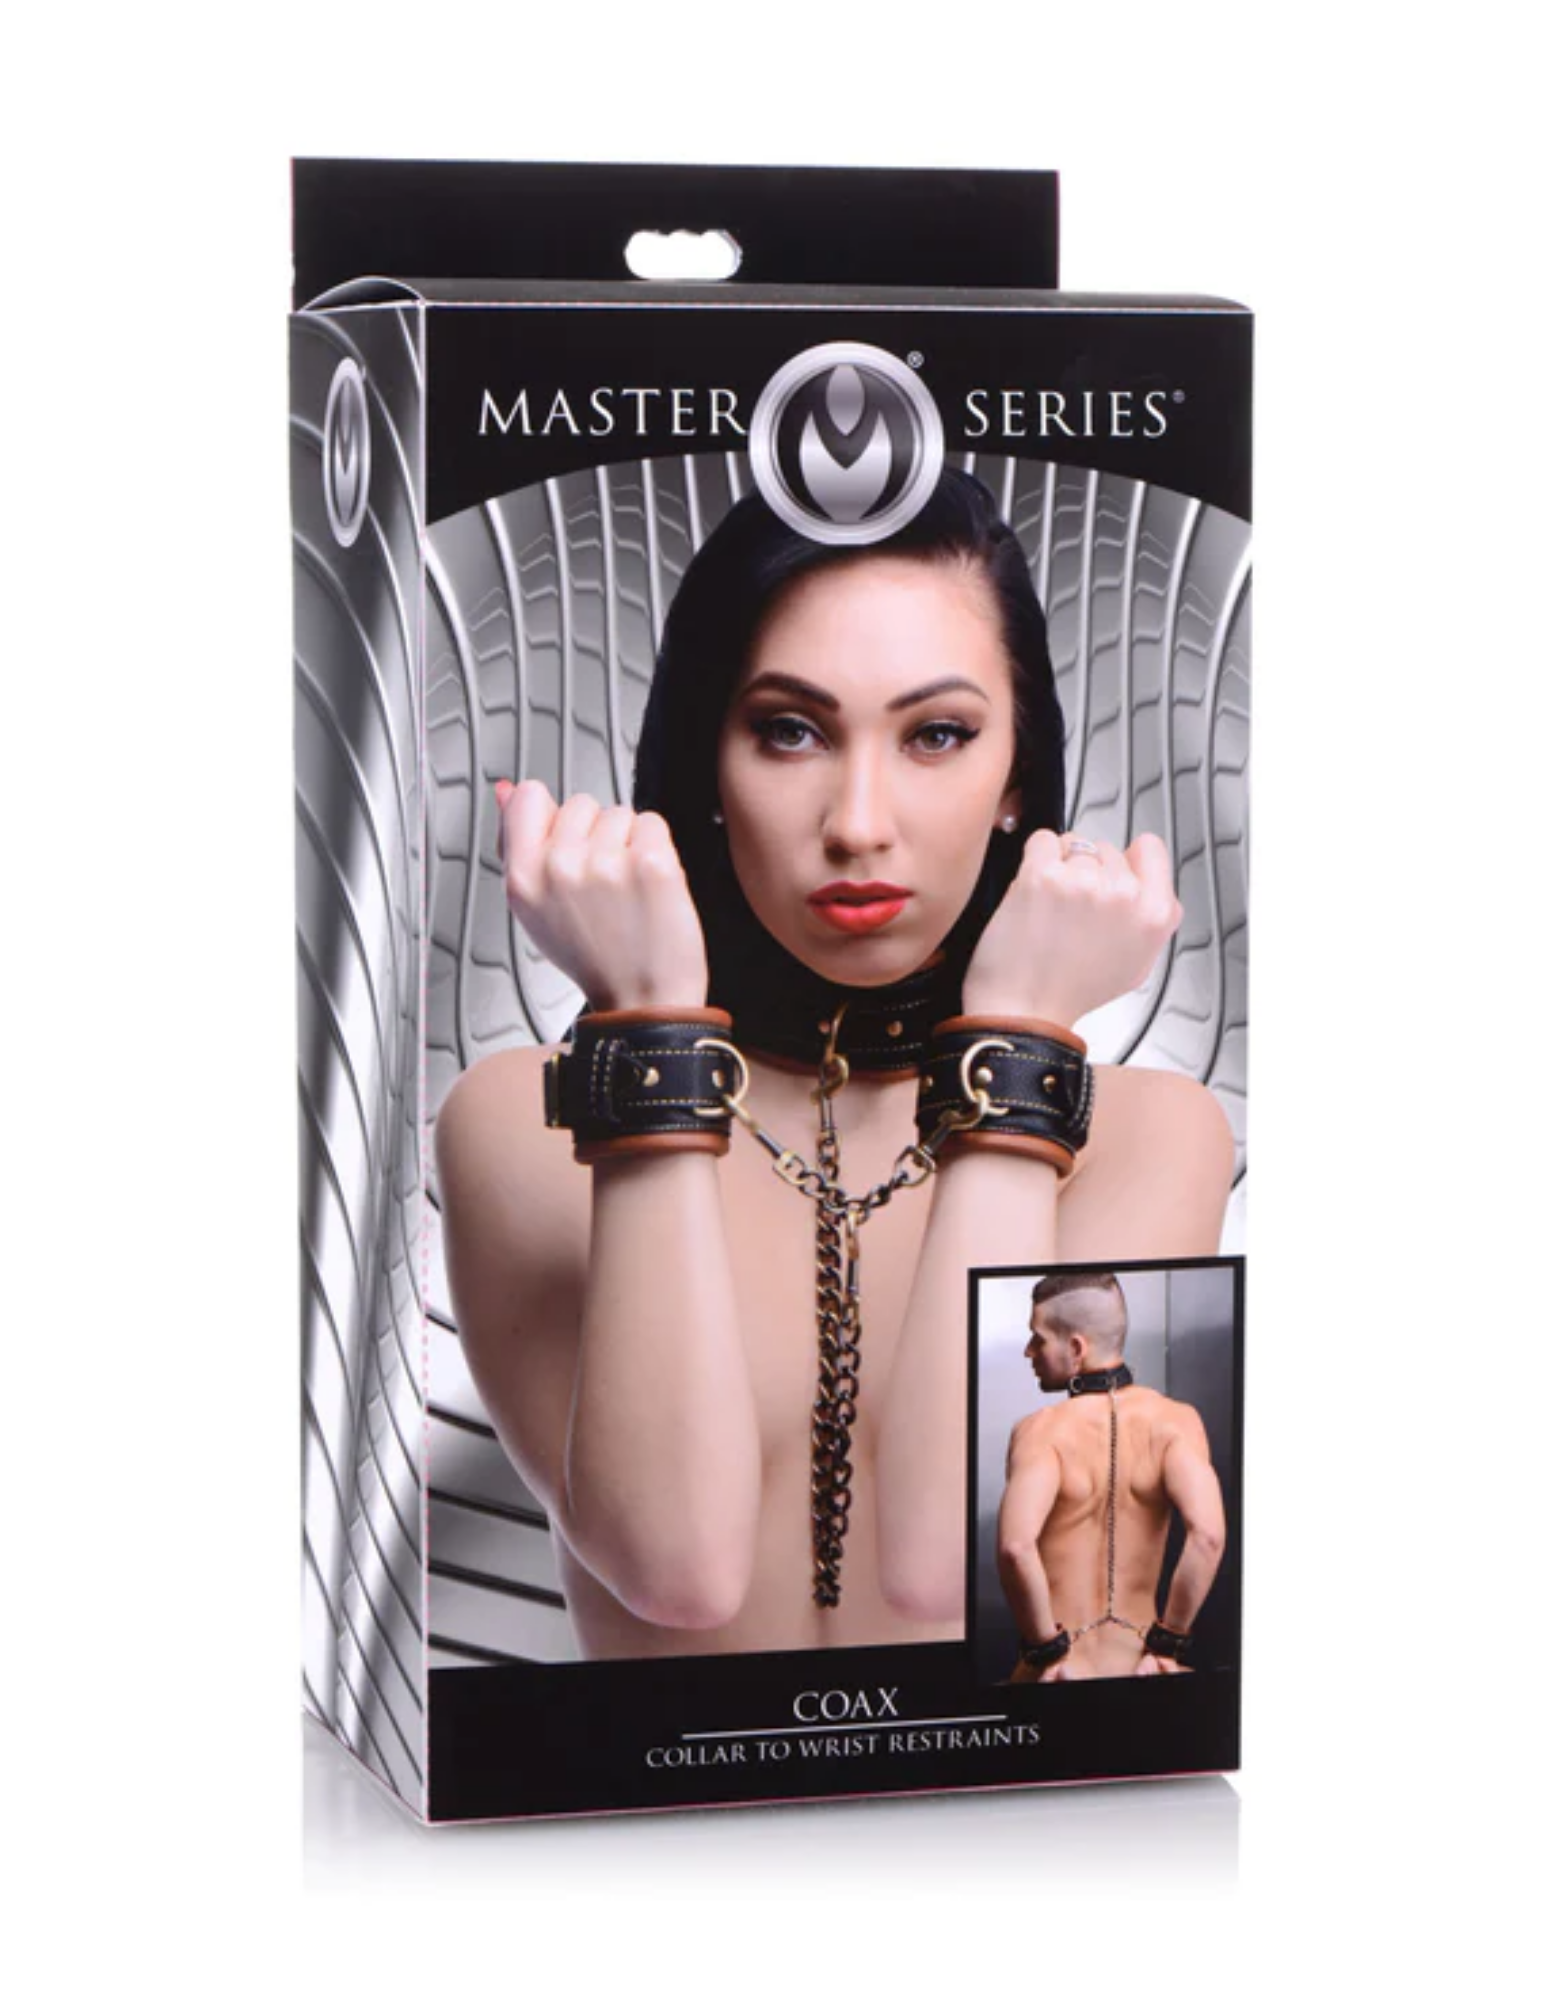 Master Series Coax Collar to Wrist Restraints in package.